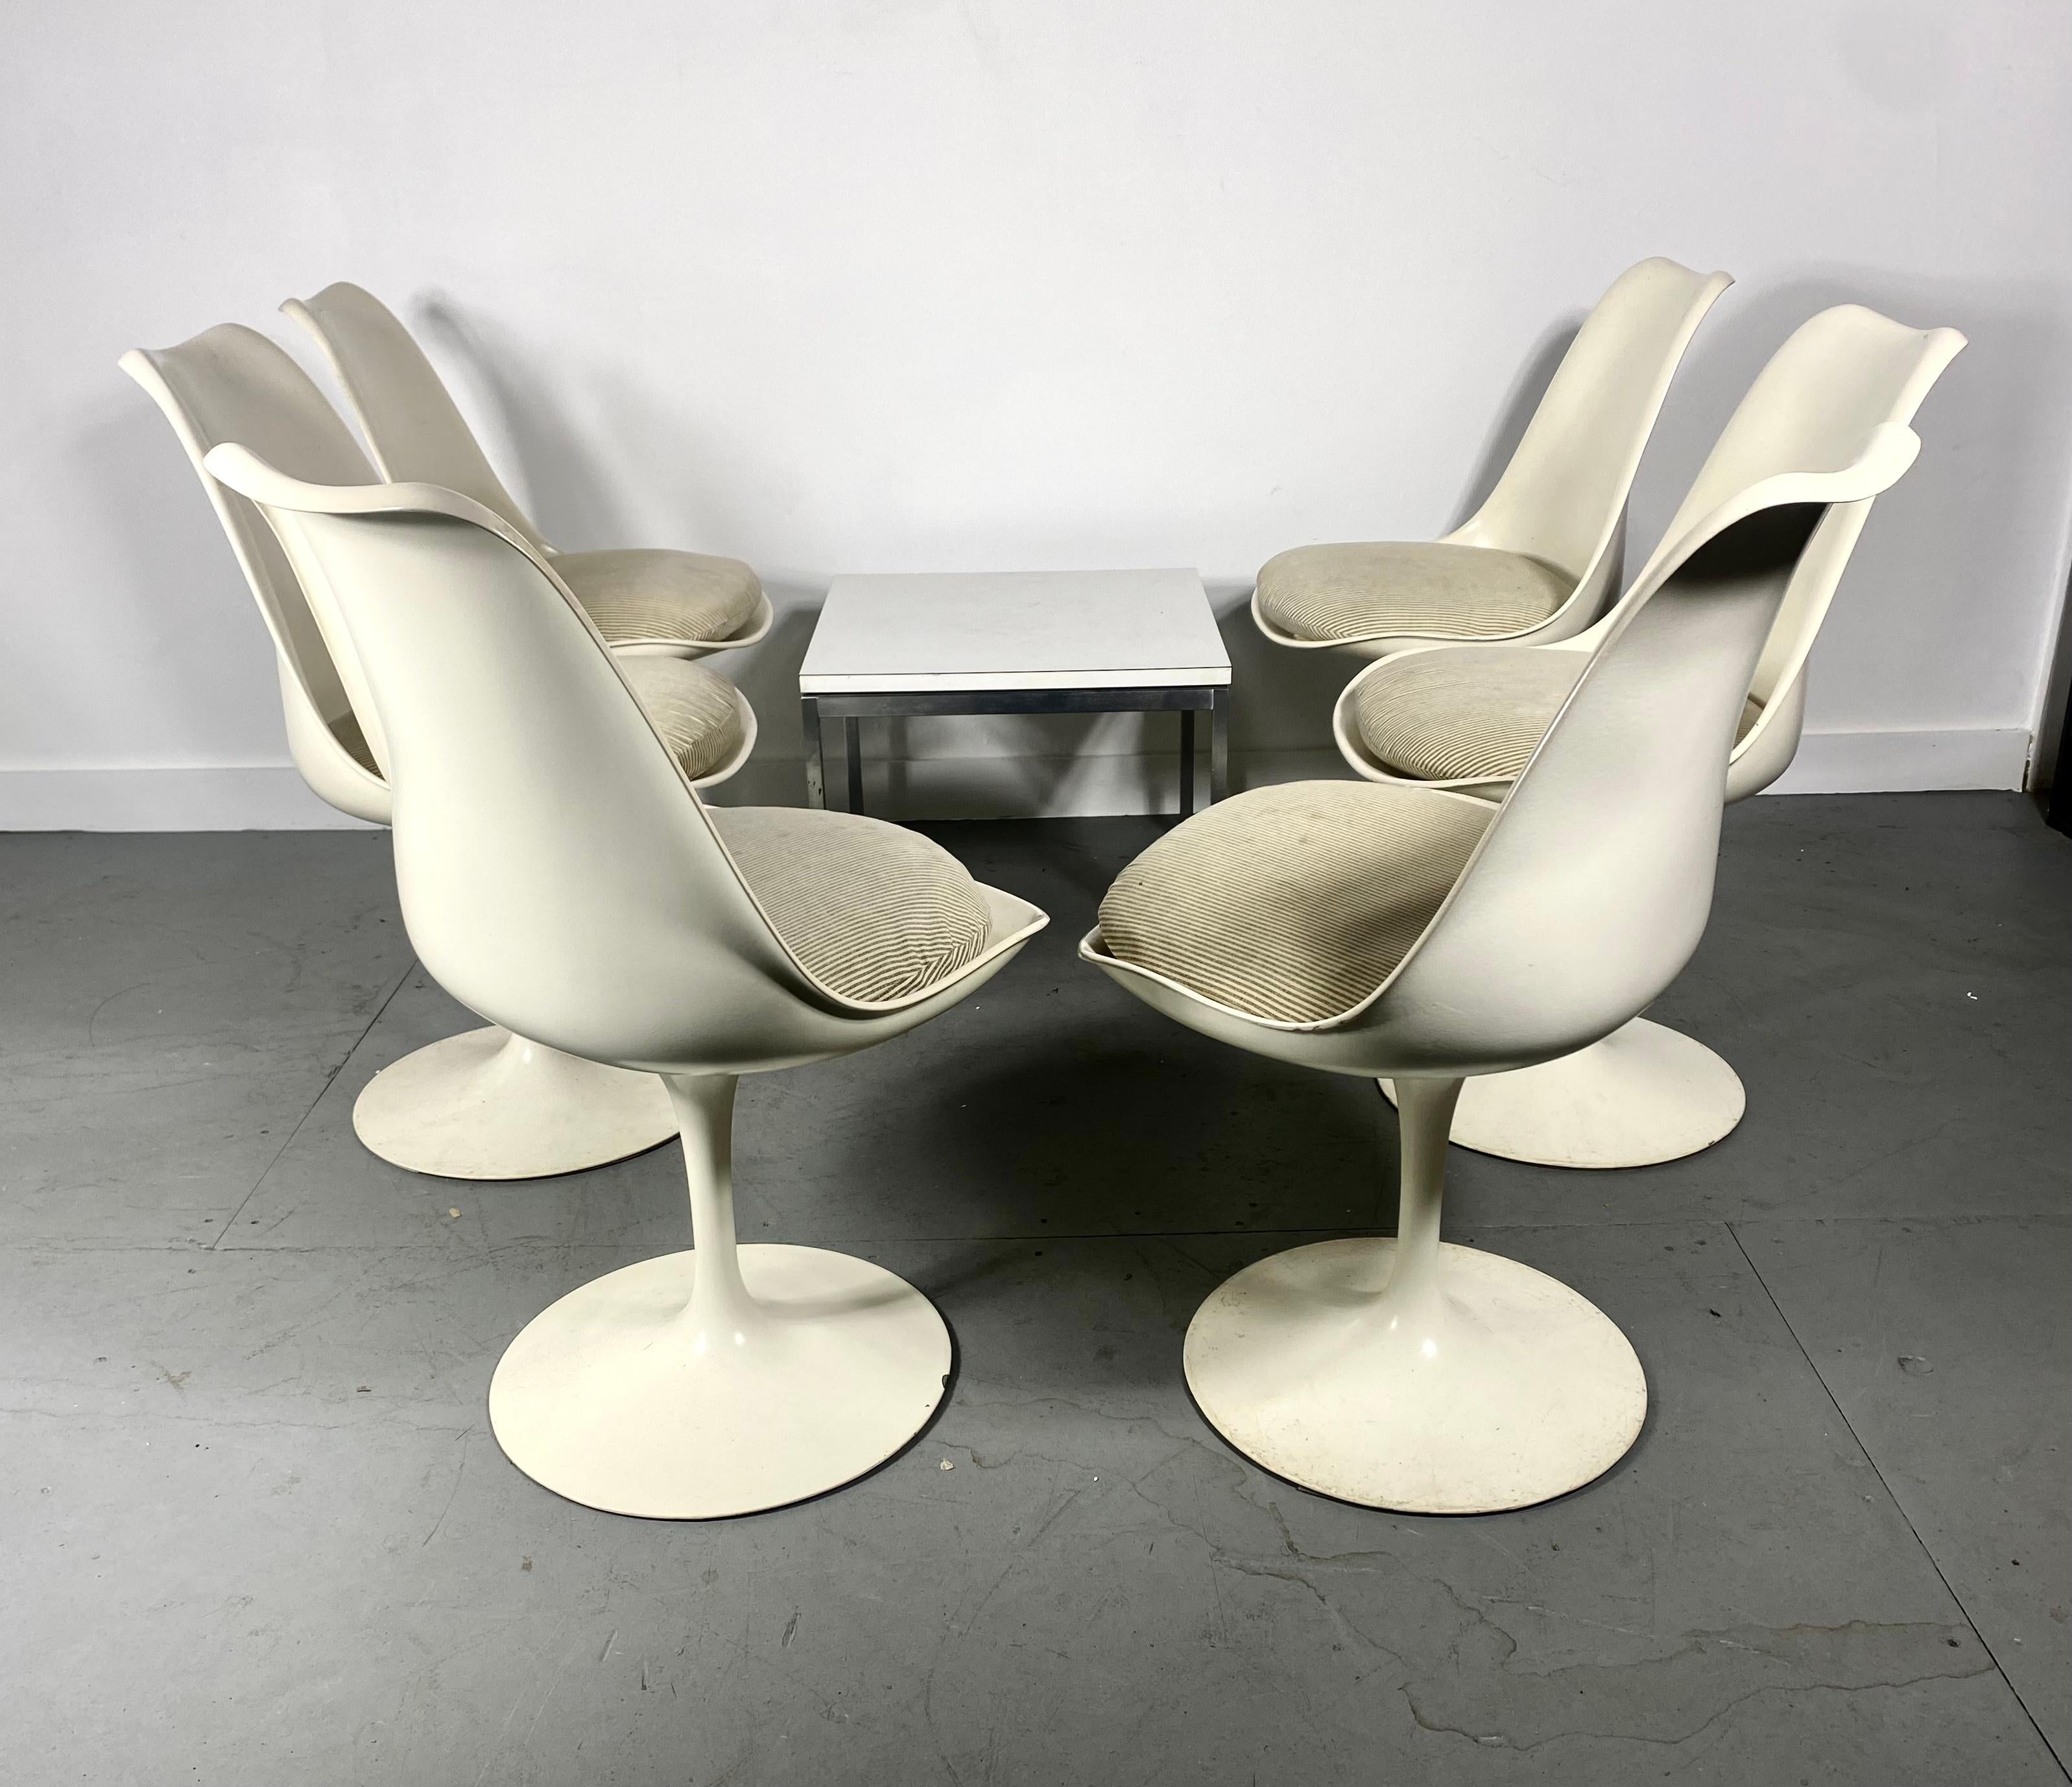 Early Production Eero Saarinen Tulip Dining Chairs Knoll, New York In Good Condition For Sale In Buffalo, NY